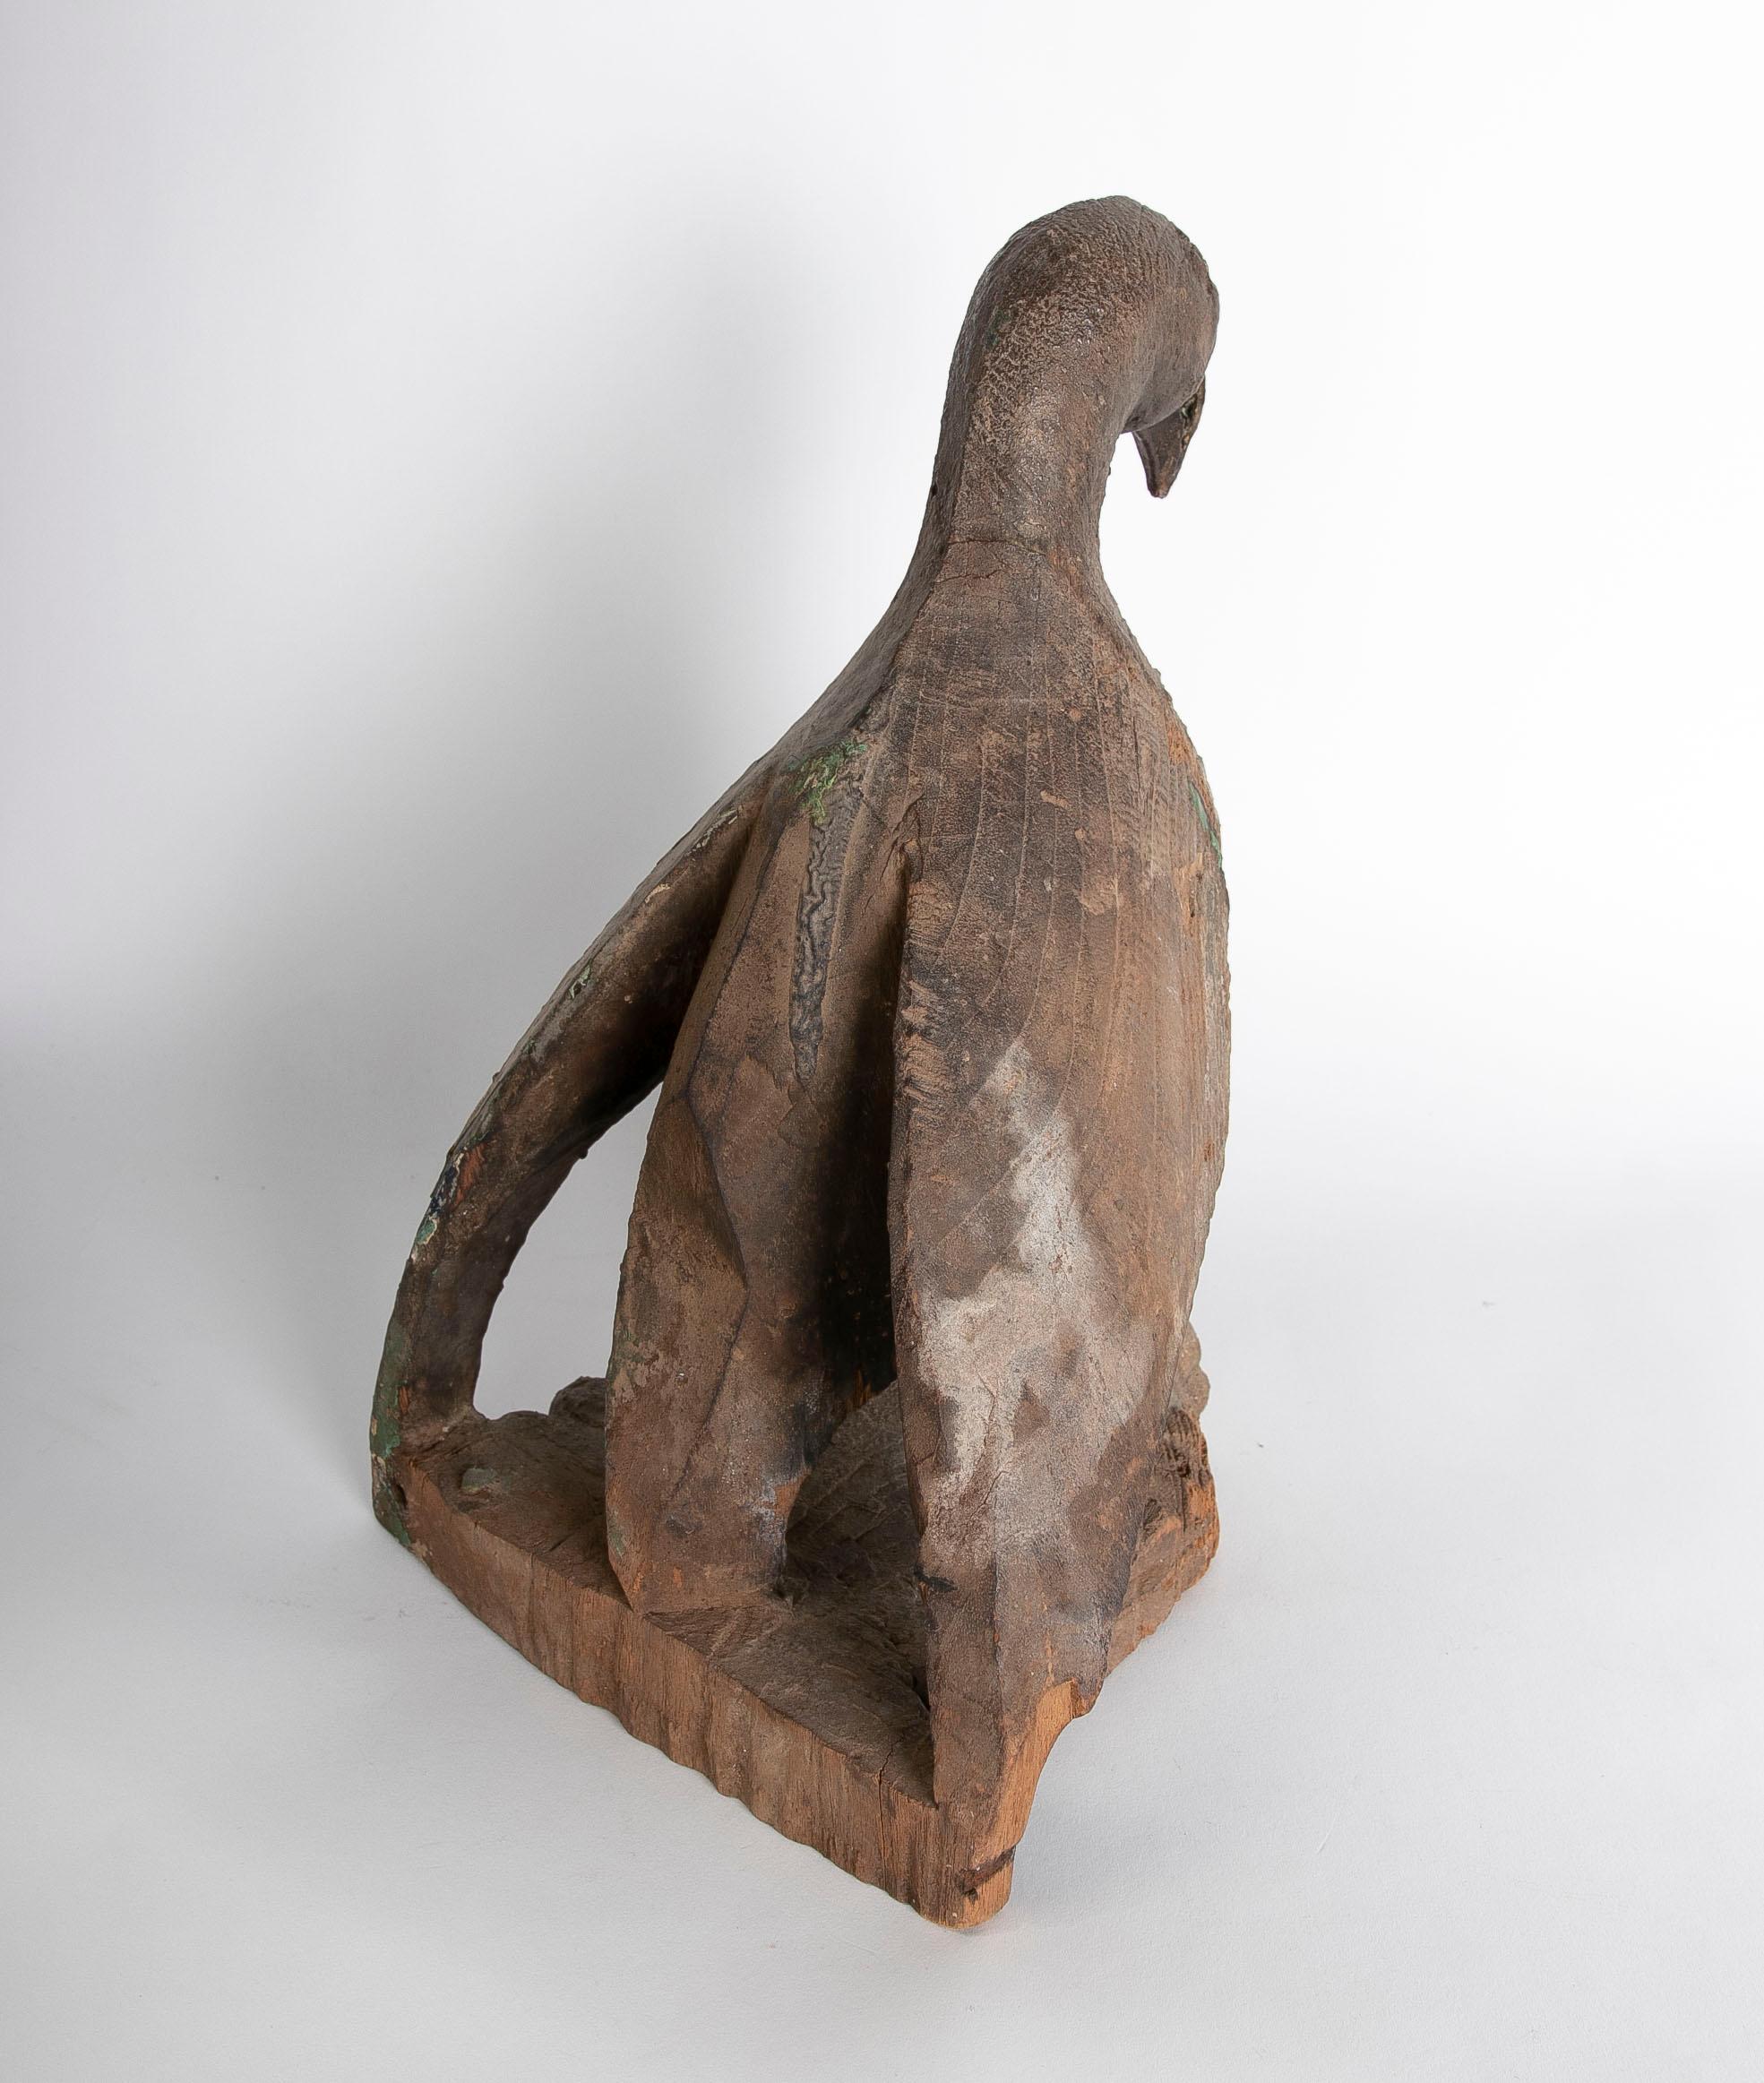 Spanish 18th Century Hand-Carved Wooden Bird Sculpture For Sale